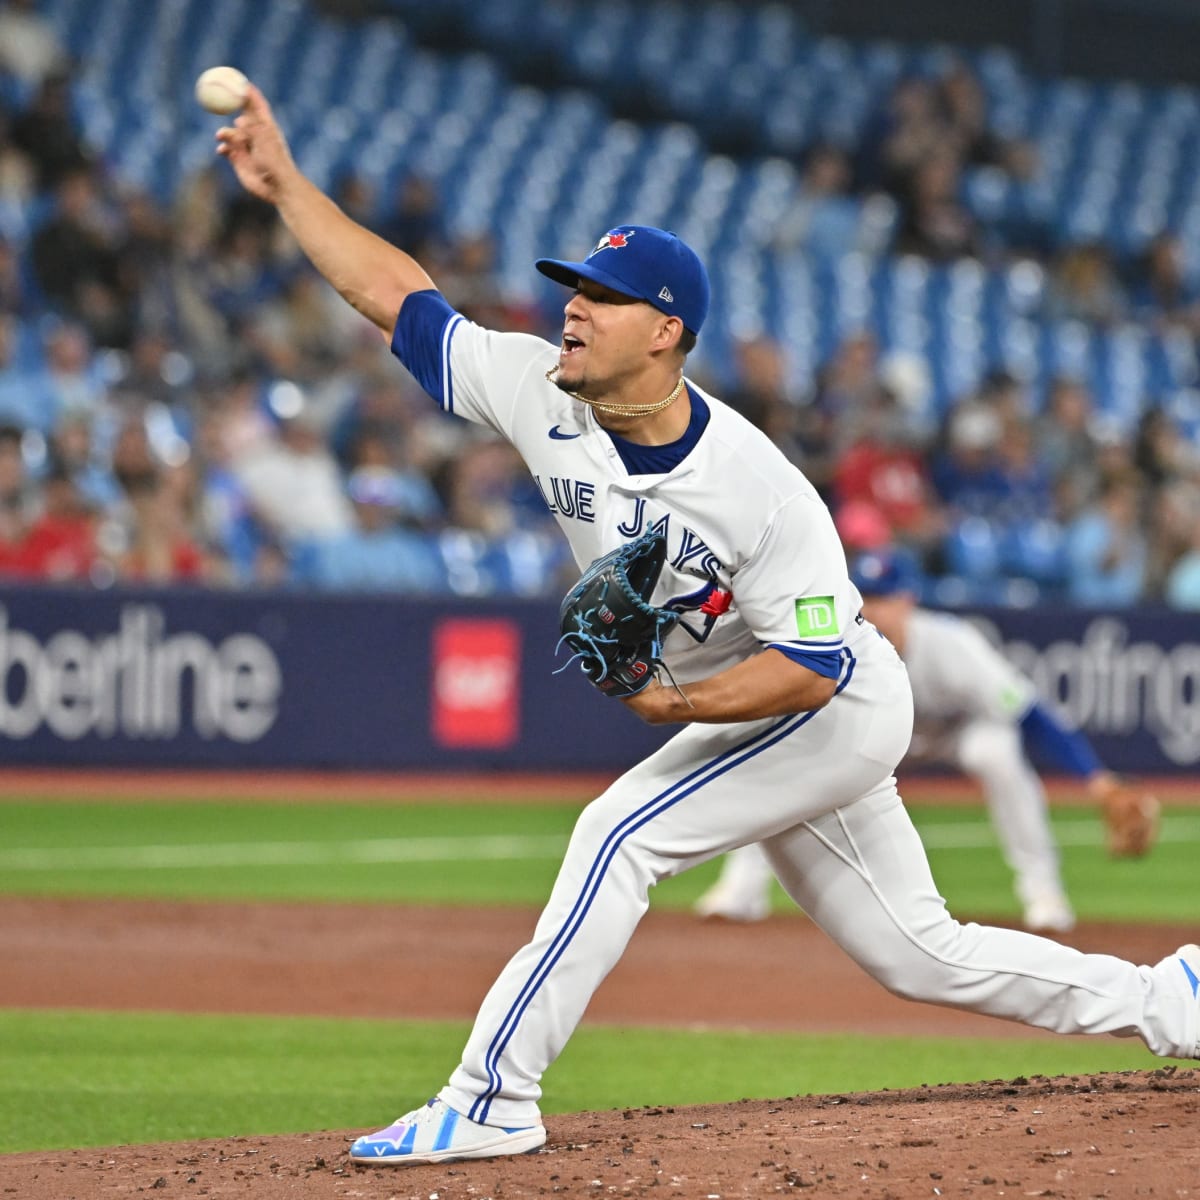 Blue Jays set to return to Toronto for home games - Sports Illustrated